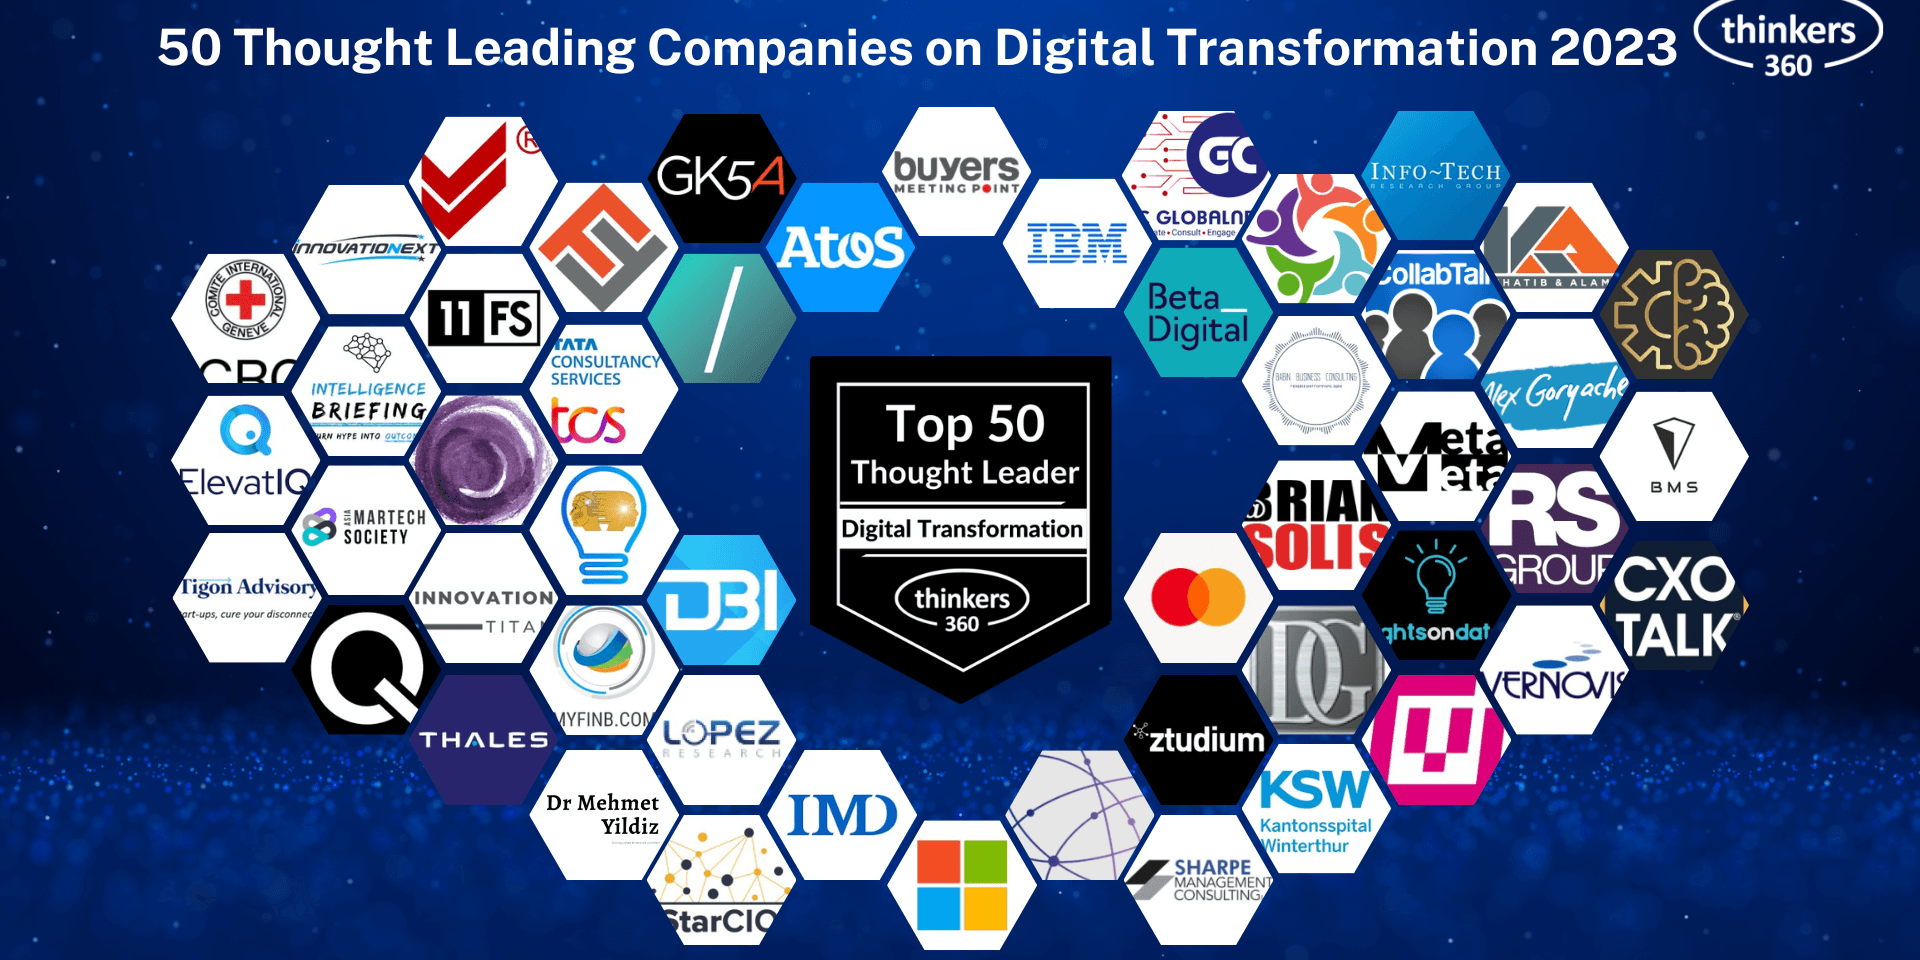 openbusinesscouncil parent company ztudium Recognized As One Of The Top 50 Thought Leading Companies on Digital Transformation By Thinkers360